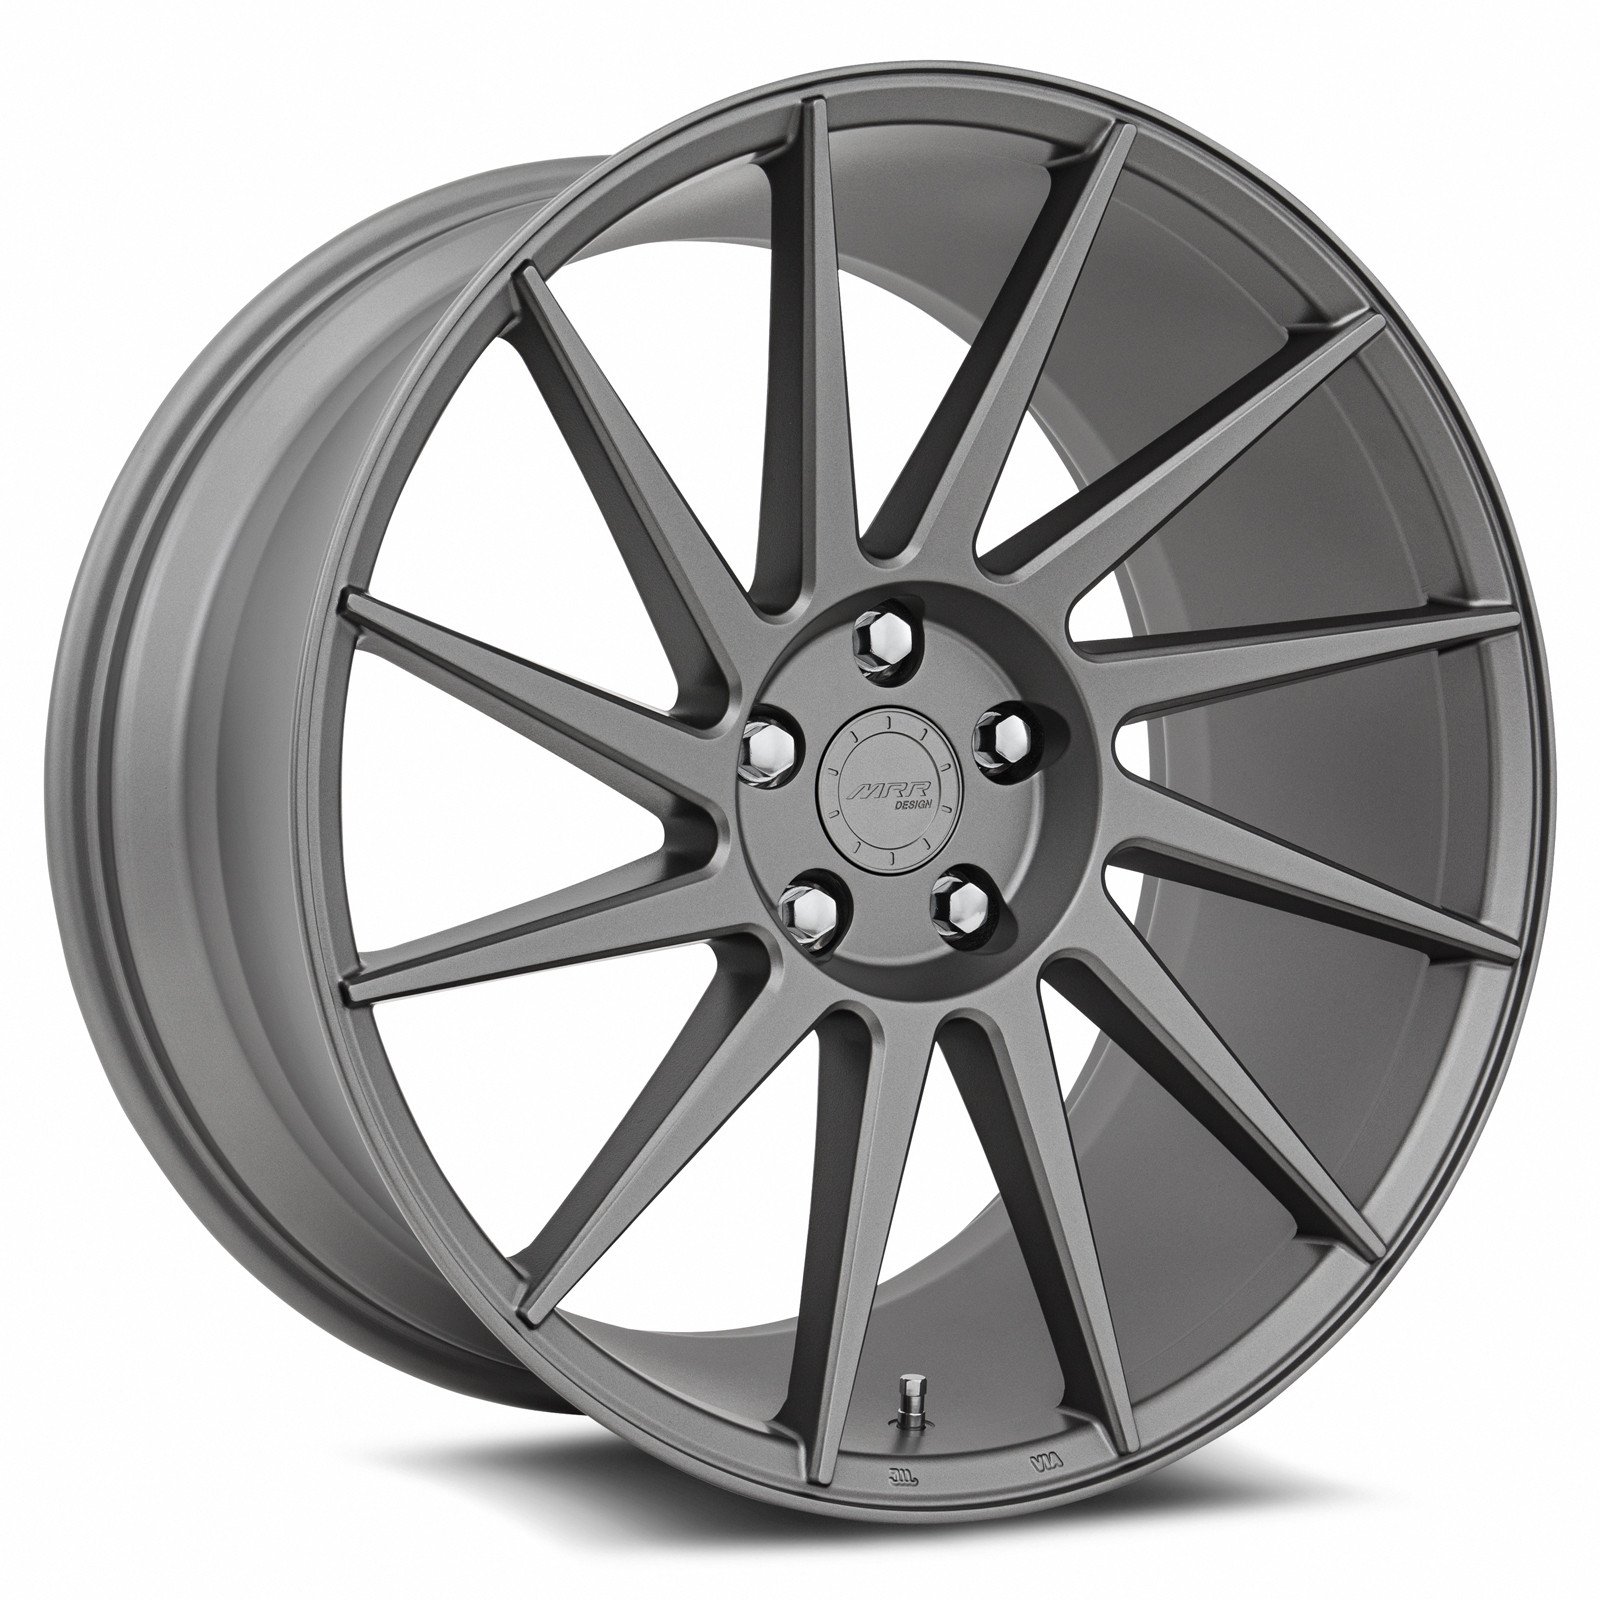 VP7  WHEELS AND RIMS PACKAGES